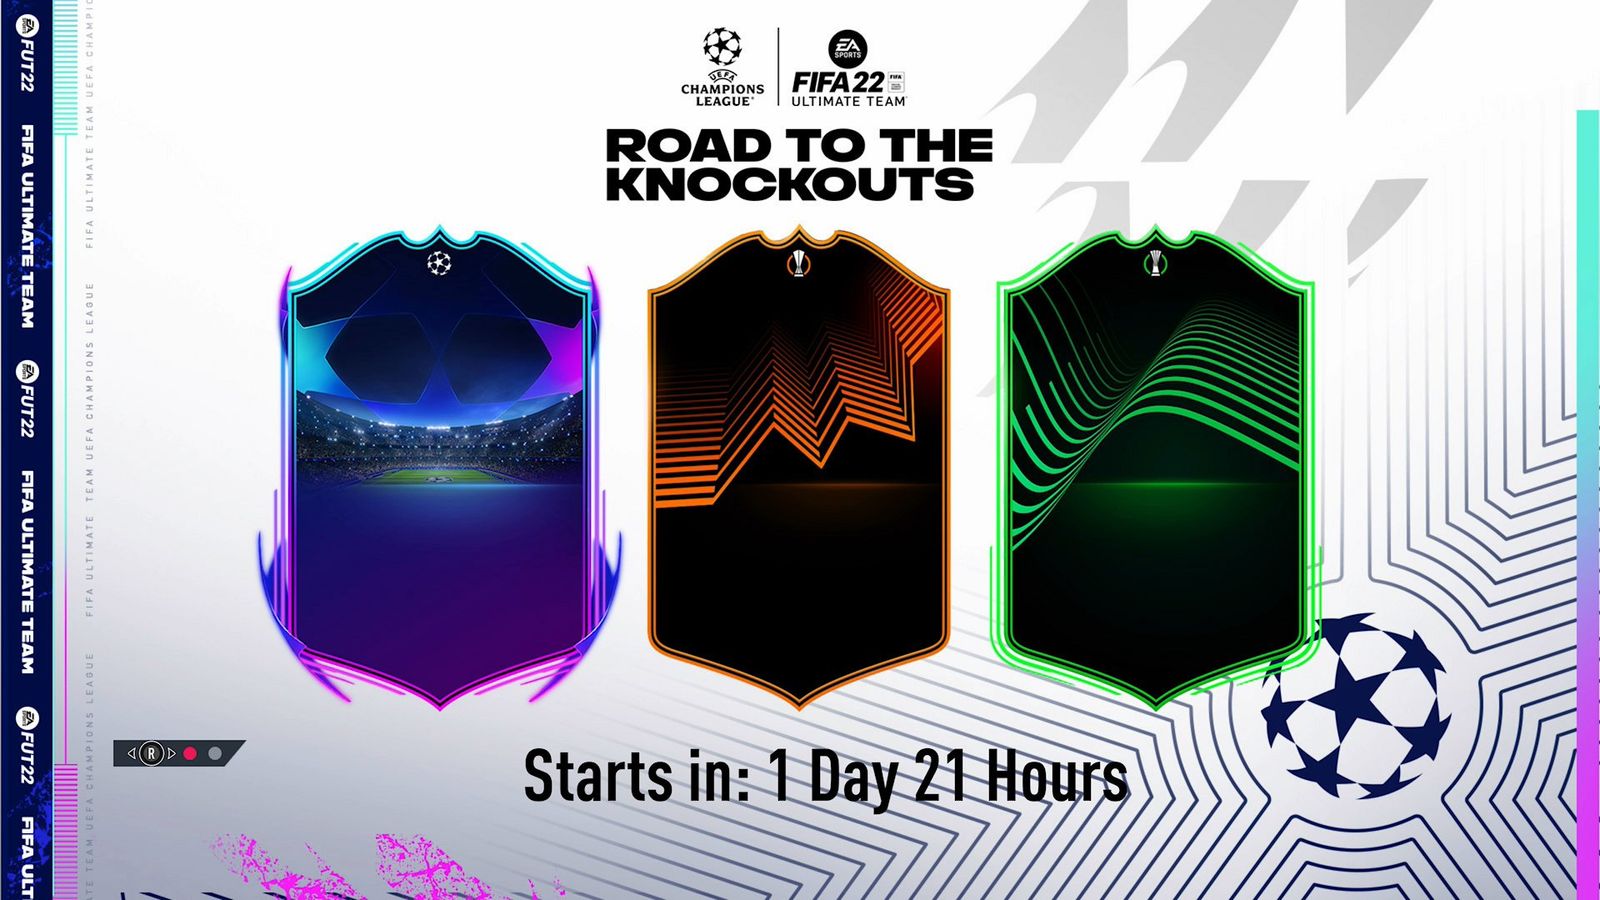 FIFA 22 Loading Screen for Road to the Knockouts